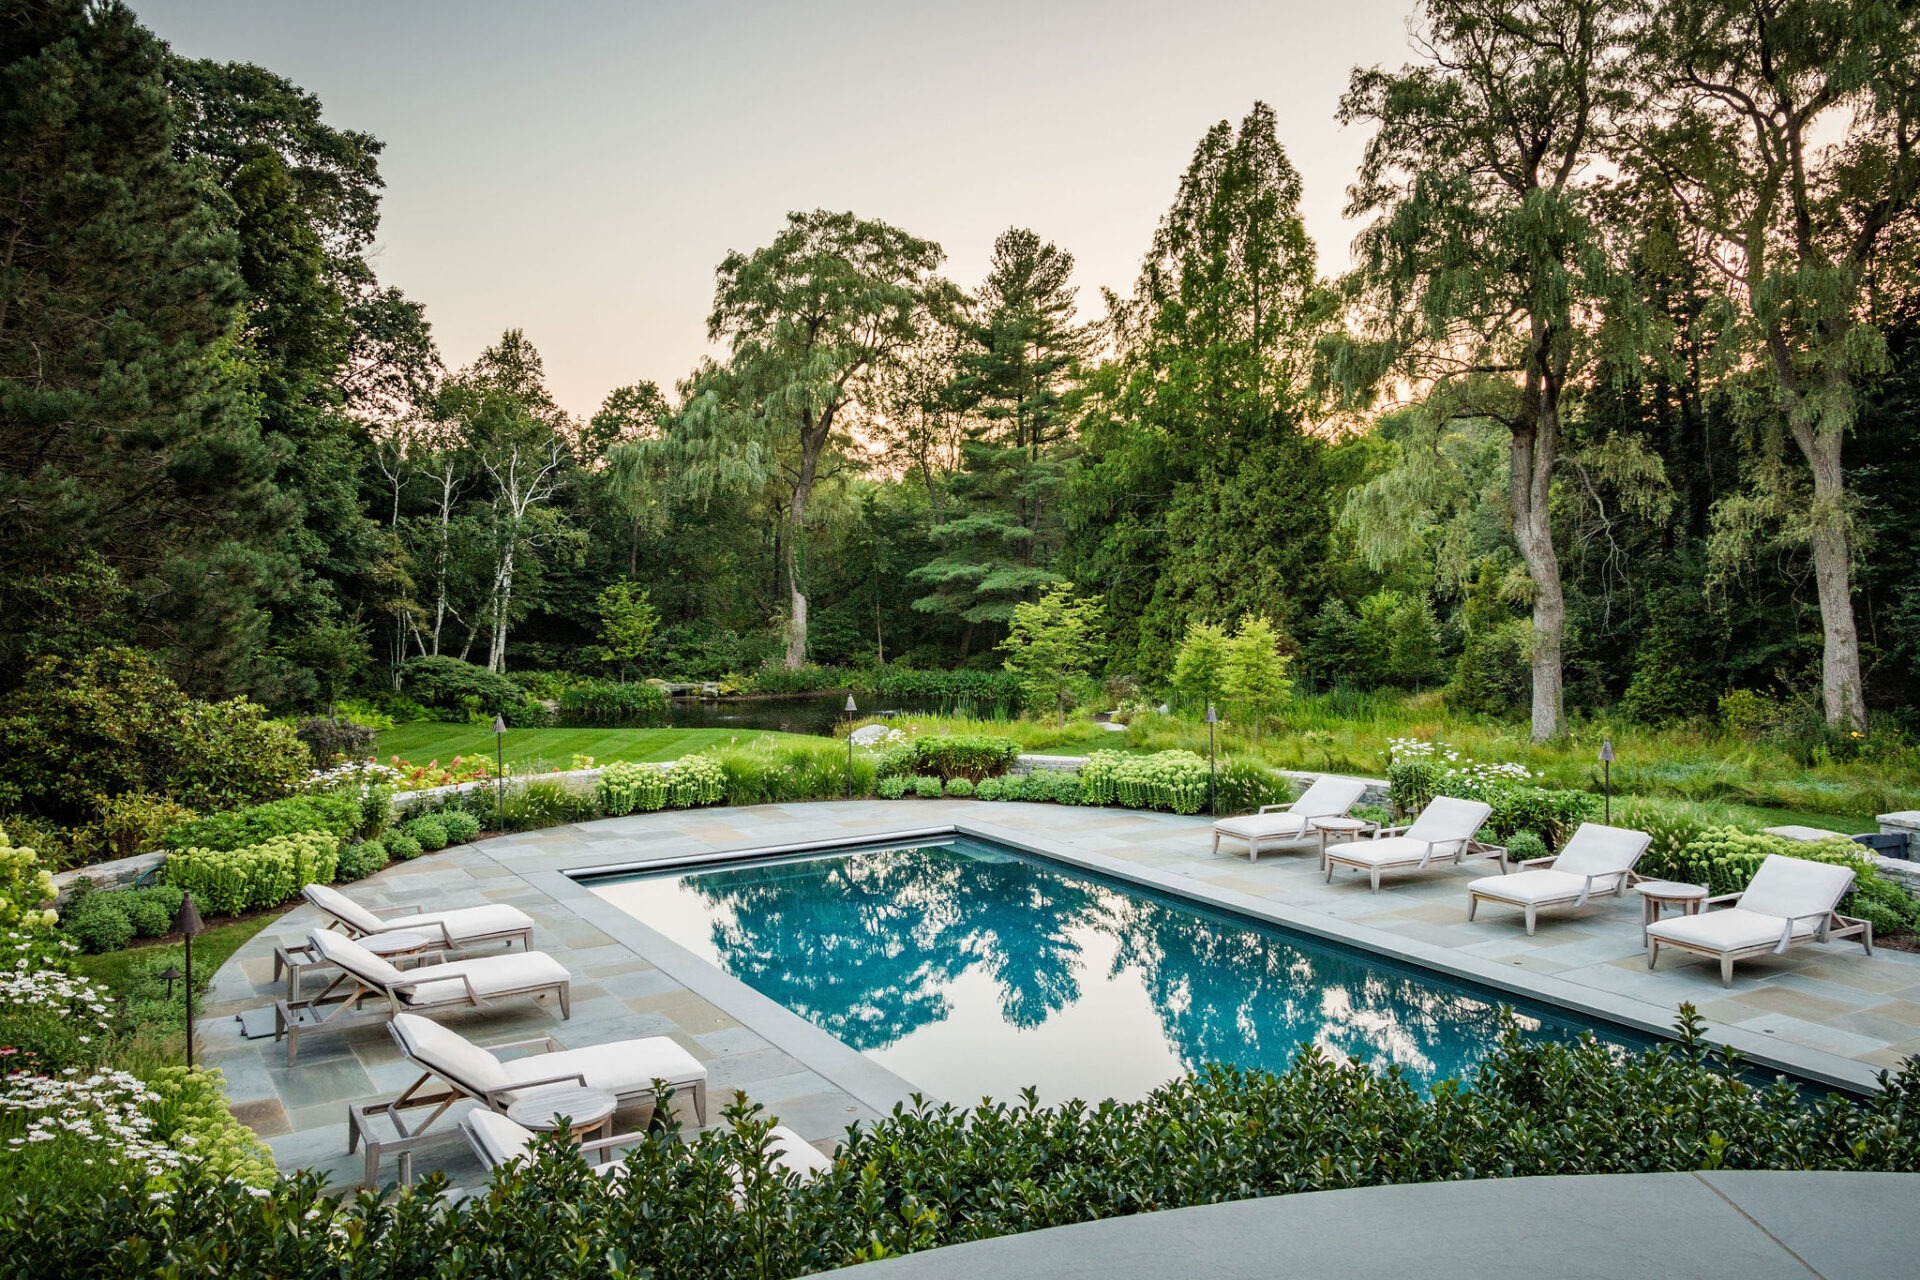 An outdoor swimming pool surrounded by lounge chairs, neatly landscaped gardens, and lush trees reflects the tranquil dusk sky in a serene setting.